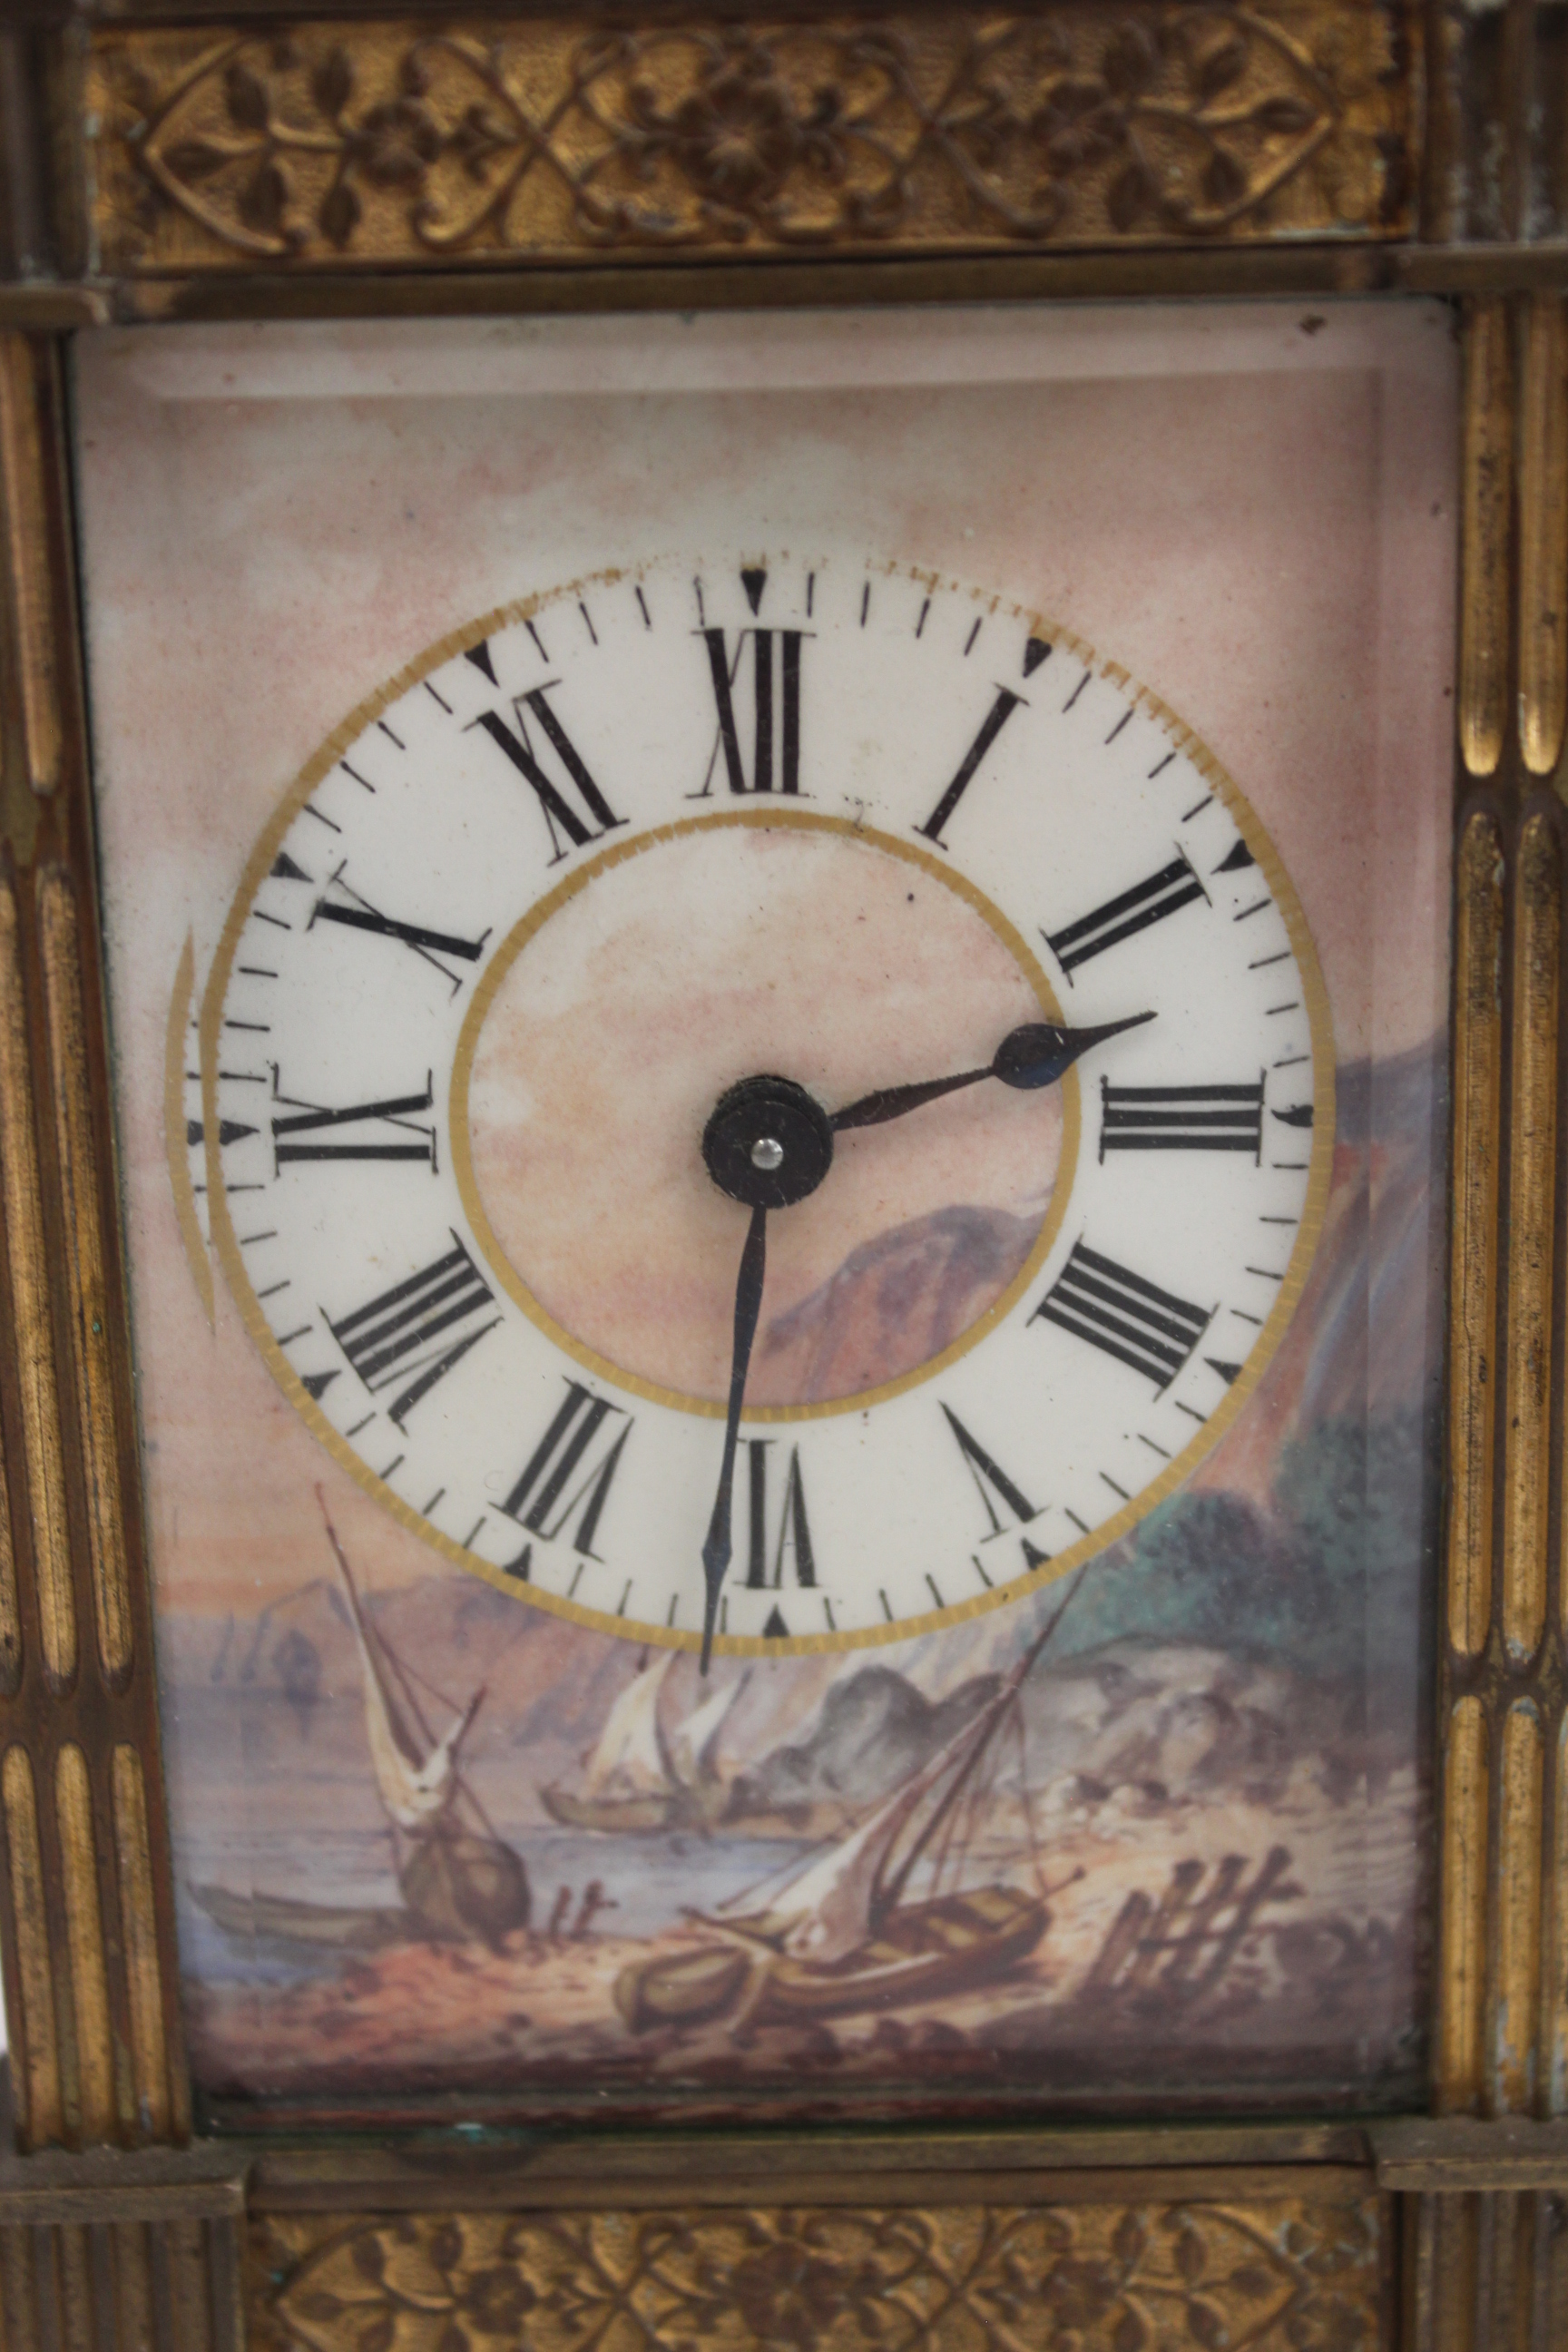 Cylinder carriage timepiece with painted and gilt porcelain dial depicting a coastal scene with - Image 2 of 5